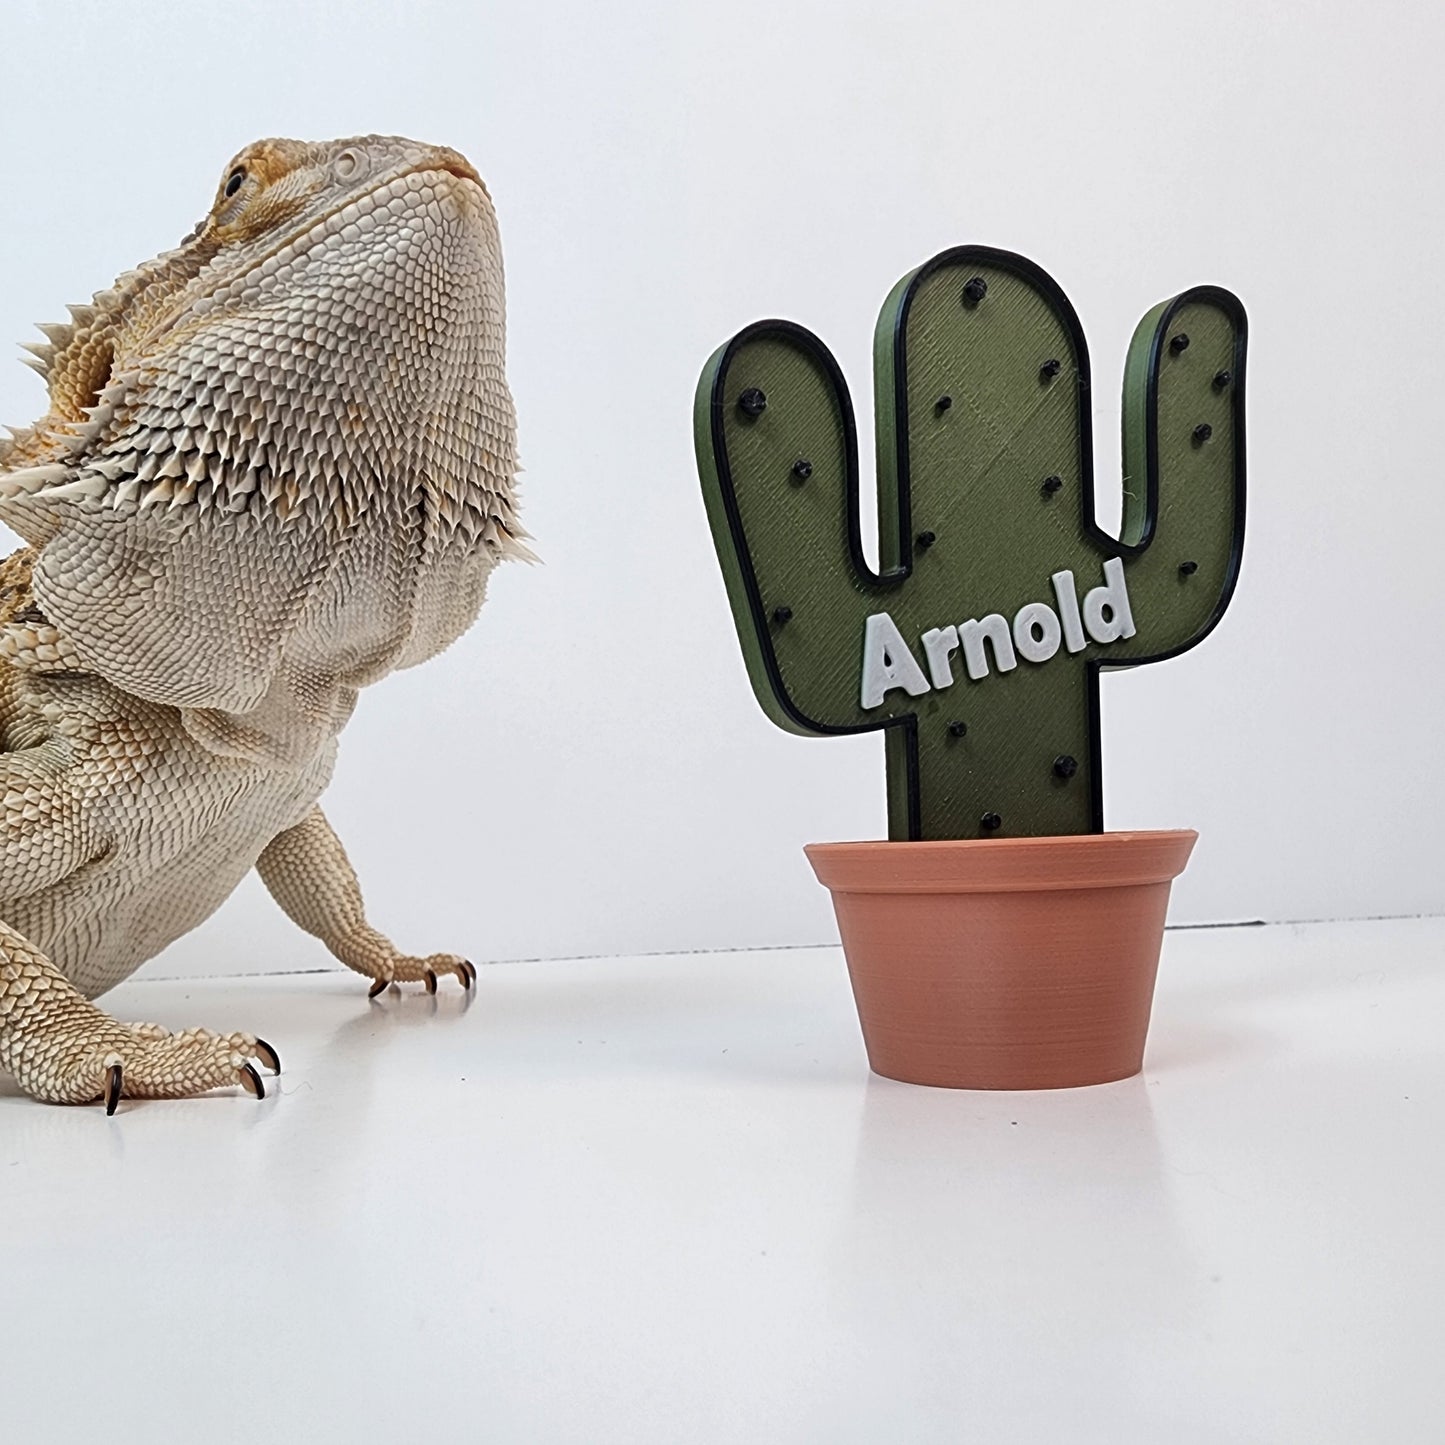 Personalized Cactus Name Sign with Stand for Amphibians, Reptiles and More! Bearded dragons, Geckos, Tarantulas, Snakes...